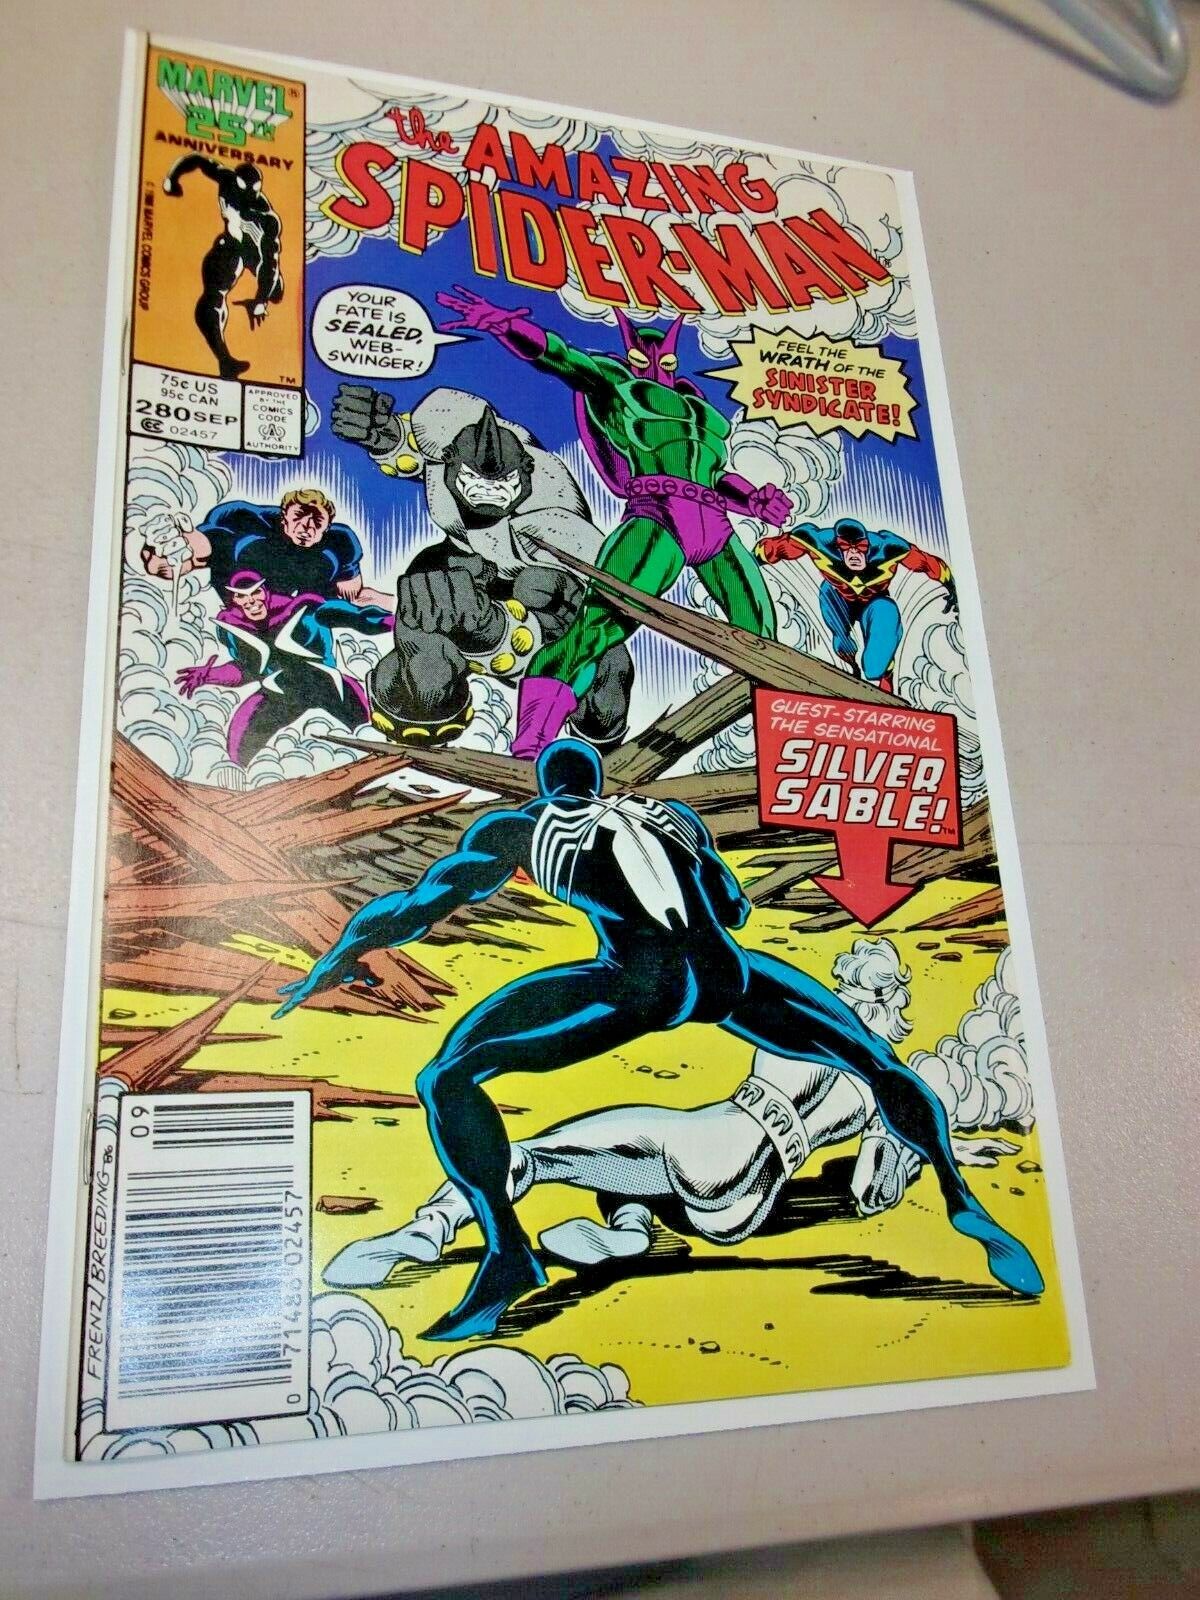 AMAZING SPIDER-MAN #280 Marvel Comics 1986 First Appearance Sinister Syndicate